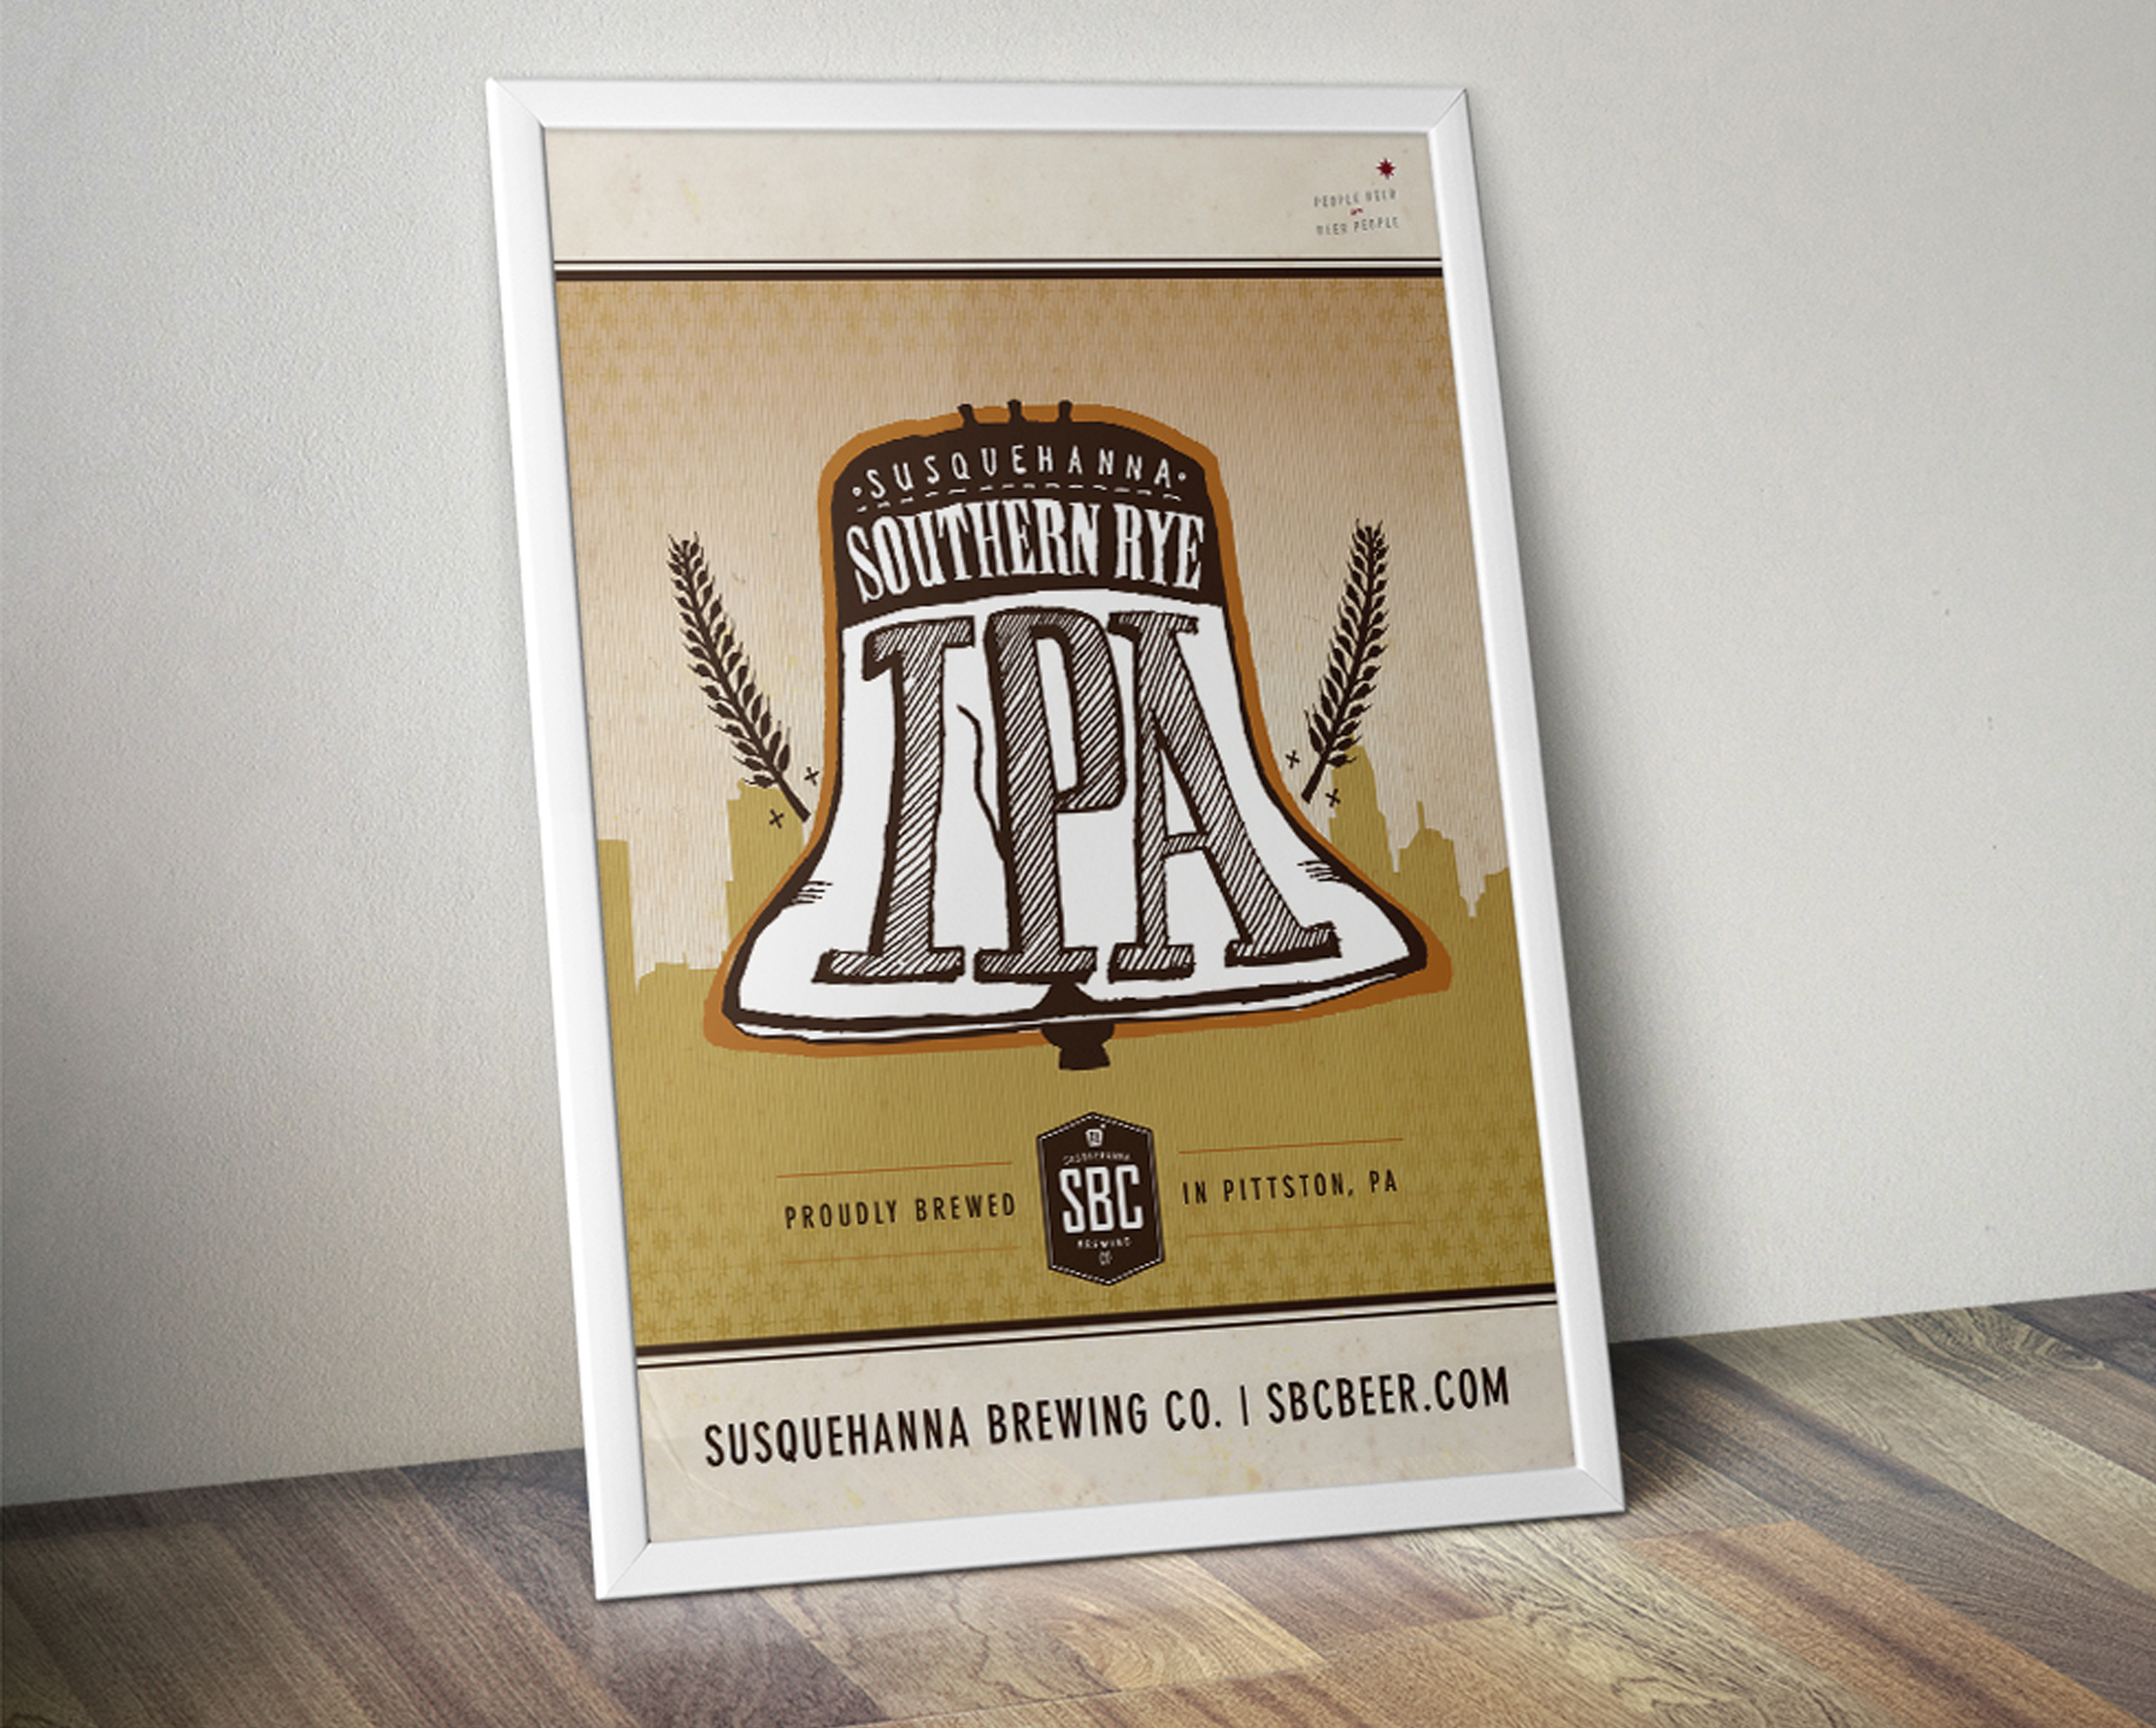 Susquehanna Brewing Co. Southern Rye IPA Poster Designed by Just Make Things